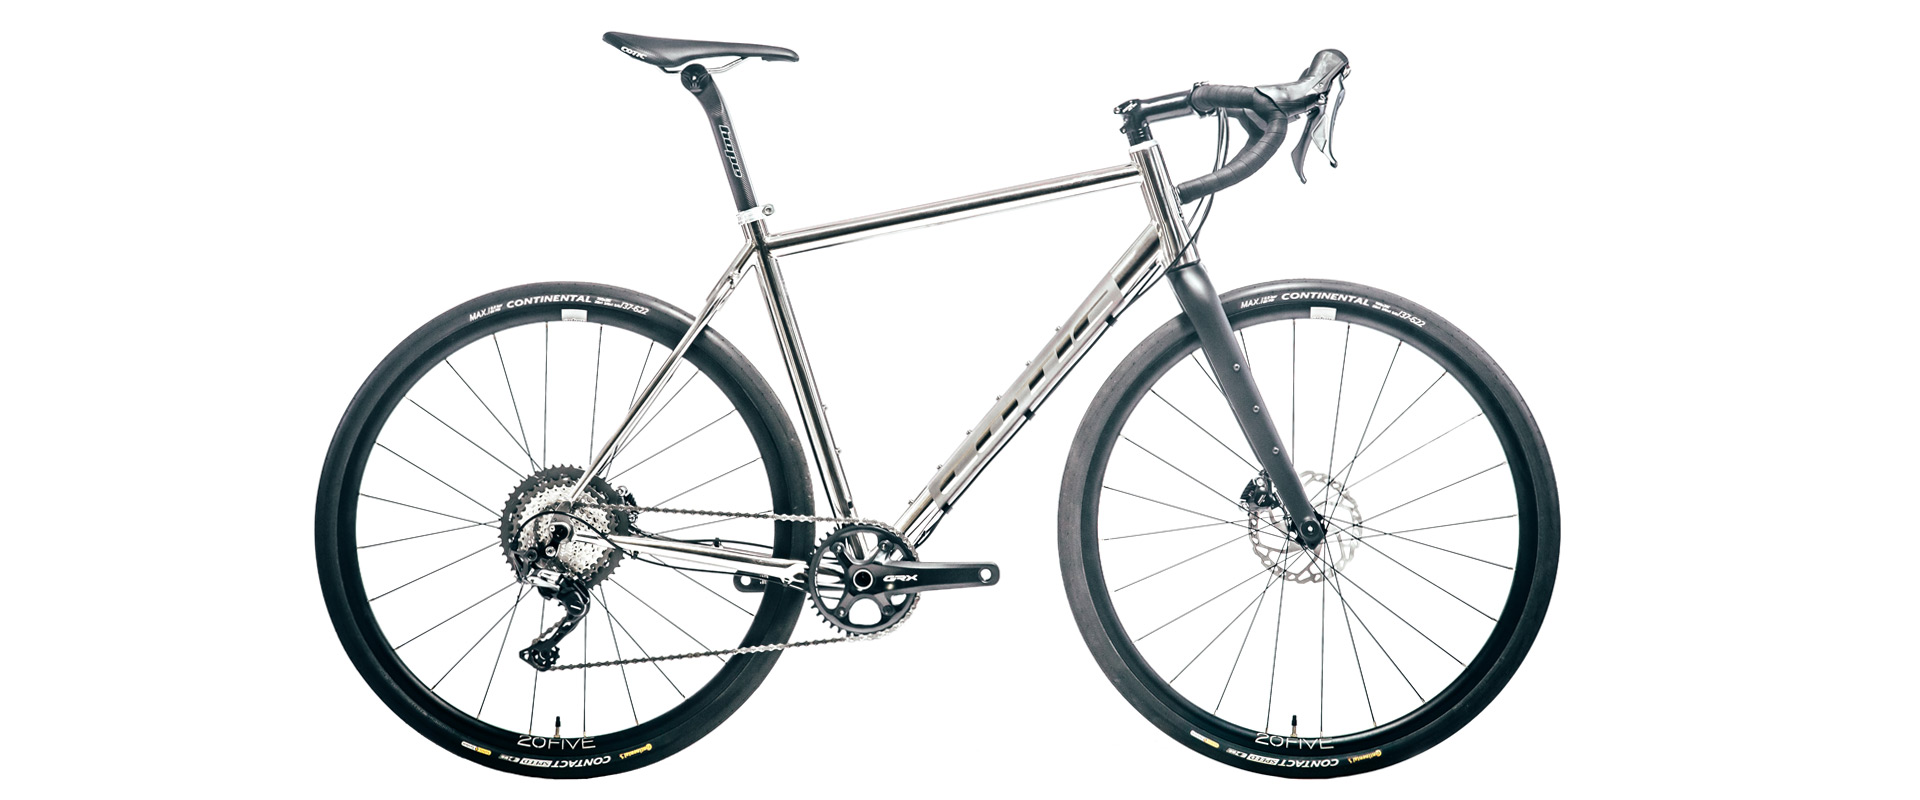 tonic, titanium, geared, drop bar, complete, bicycle, frames, frame, commute, complete bike, road, gears, uk, wheels, shimano, brakes, tough, Commuting, training, touring, cyclocross, family rides, courier work, 700c, 650b, road plus, gravel, adventure